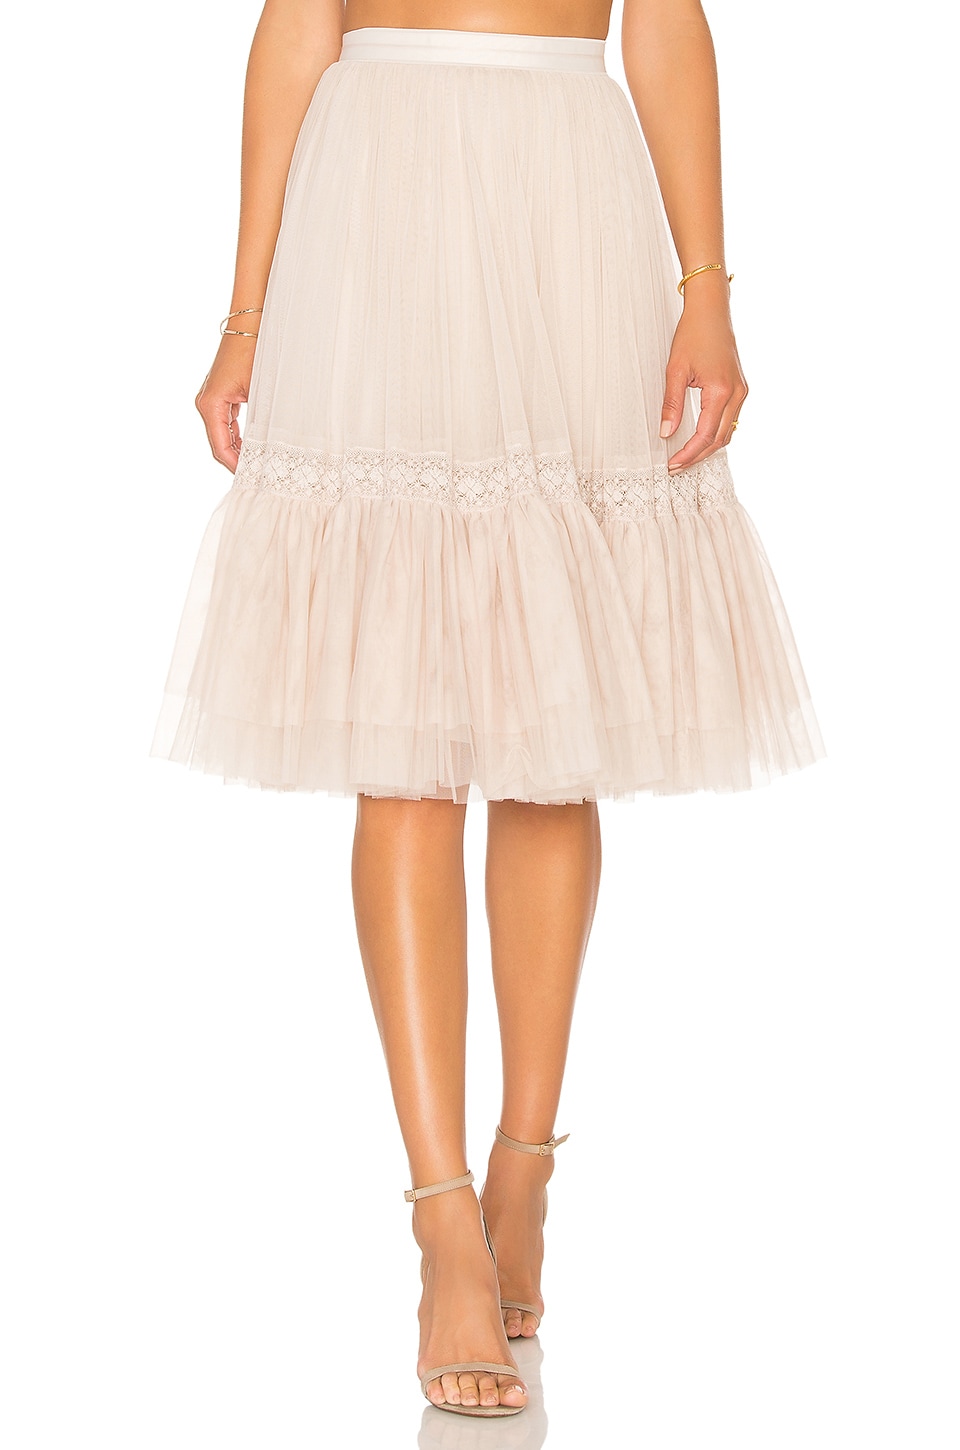 Thread Lace Tulle Skirt in Rose Beige 